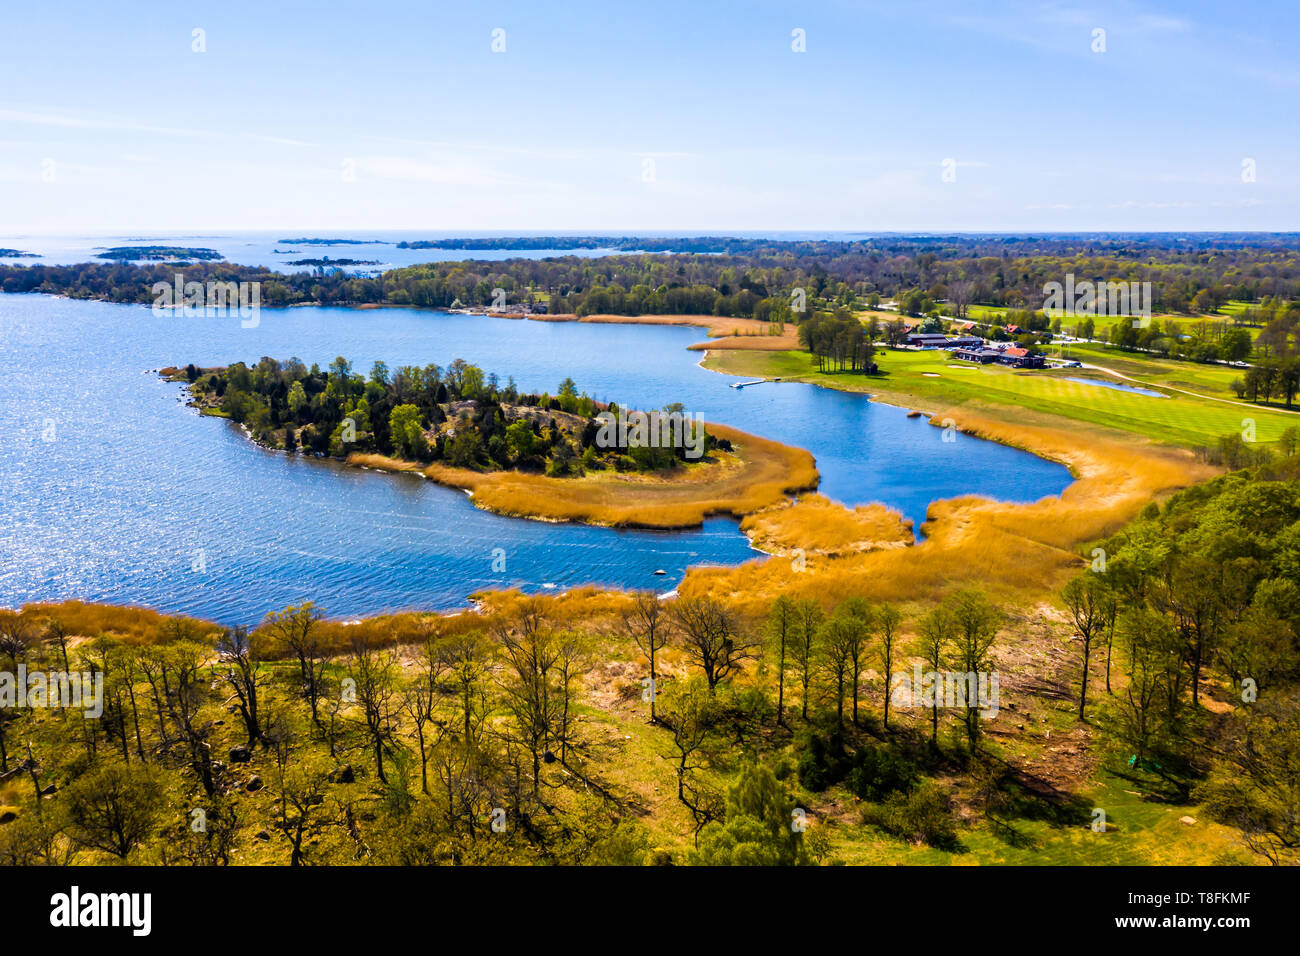 Blekinge archipelago outside the island Almo in Sweden on a fine spring day. Seaside golf course visible to the right. Stock Photo